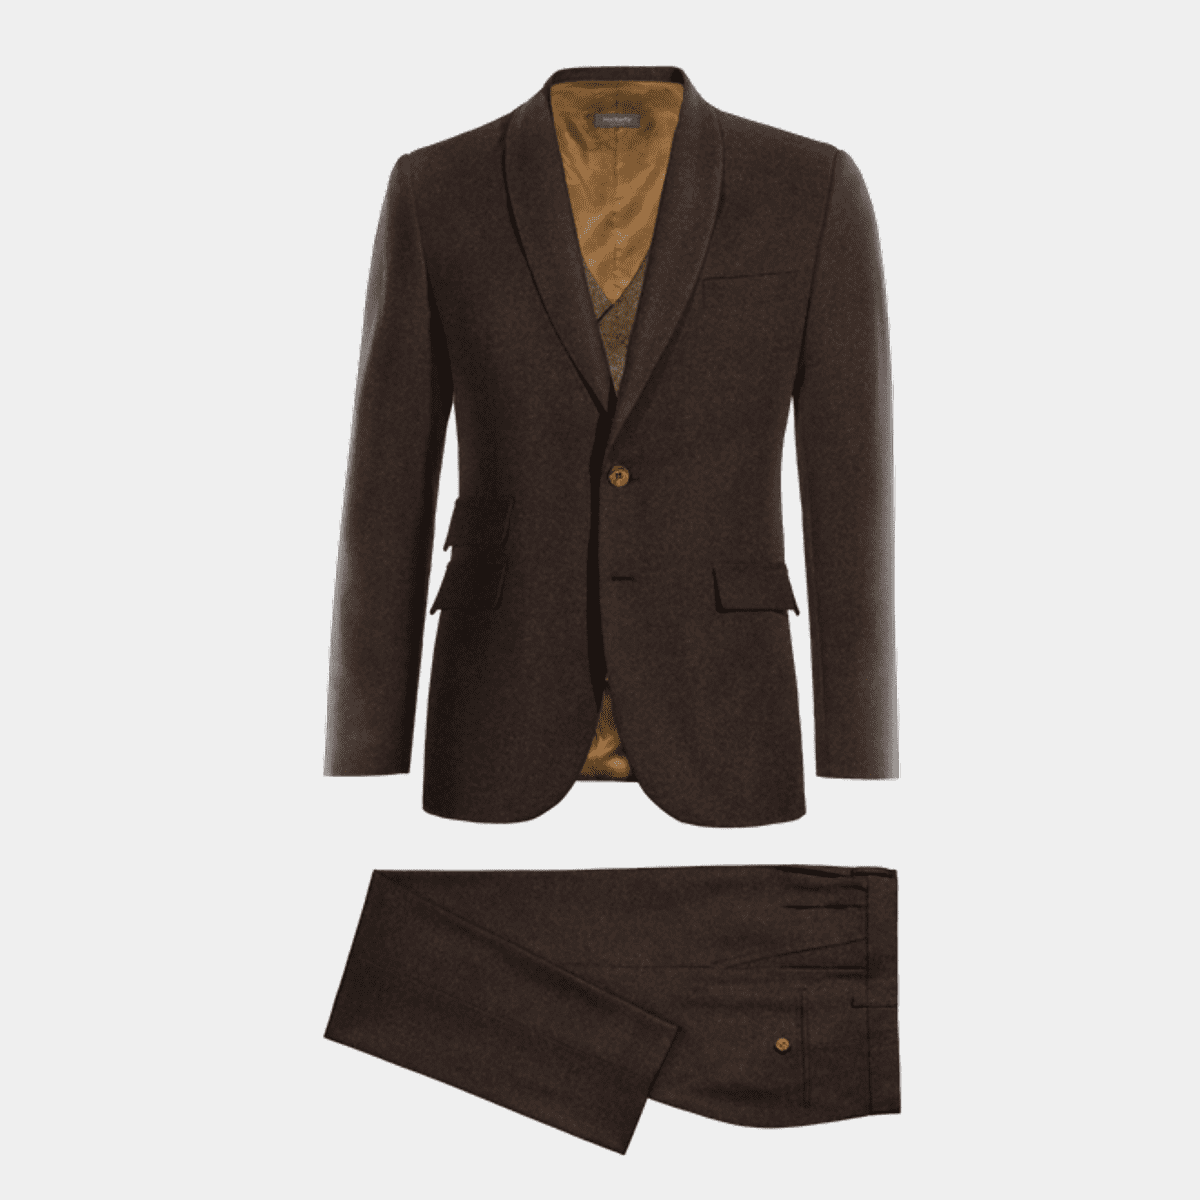 Reddish brown donegal tweed Suit with contrasted waistcoat